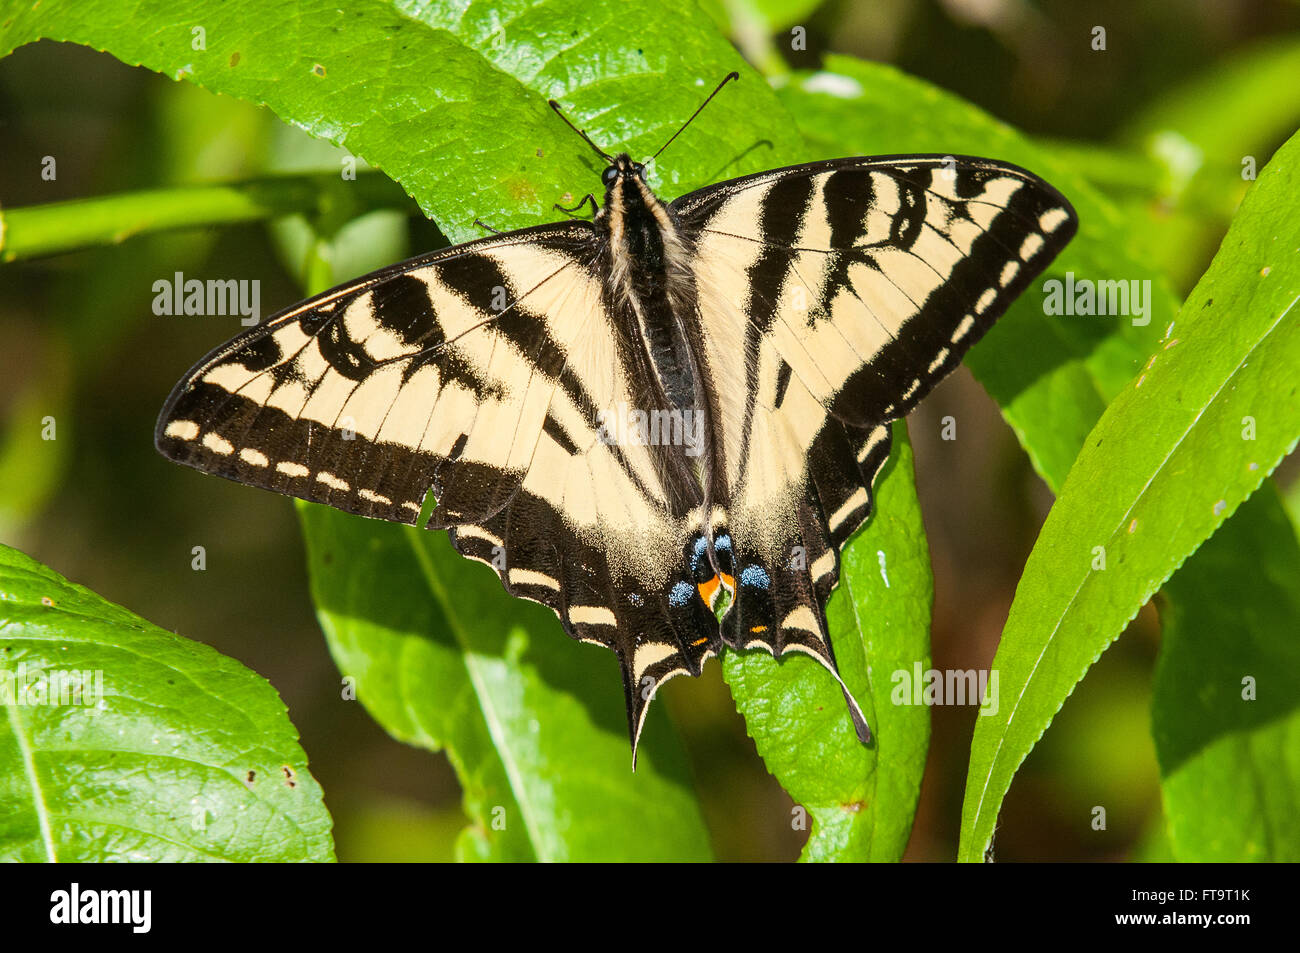 A Western Tiger Swallowtail Butterfly (Papilio rutulus). Washington, United States. Stock Photo